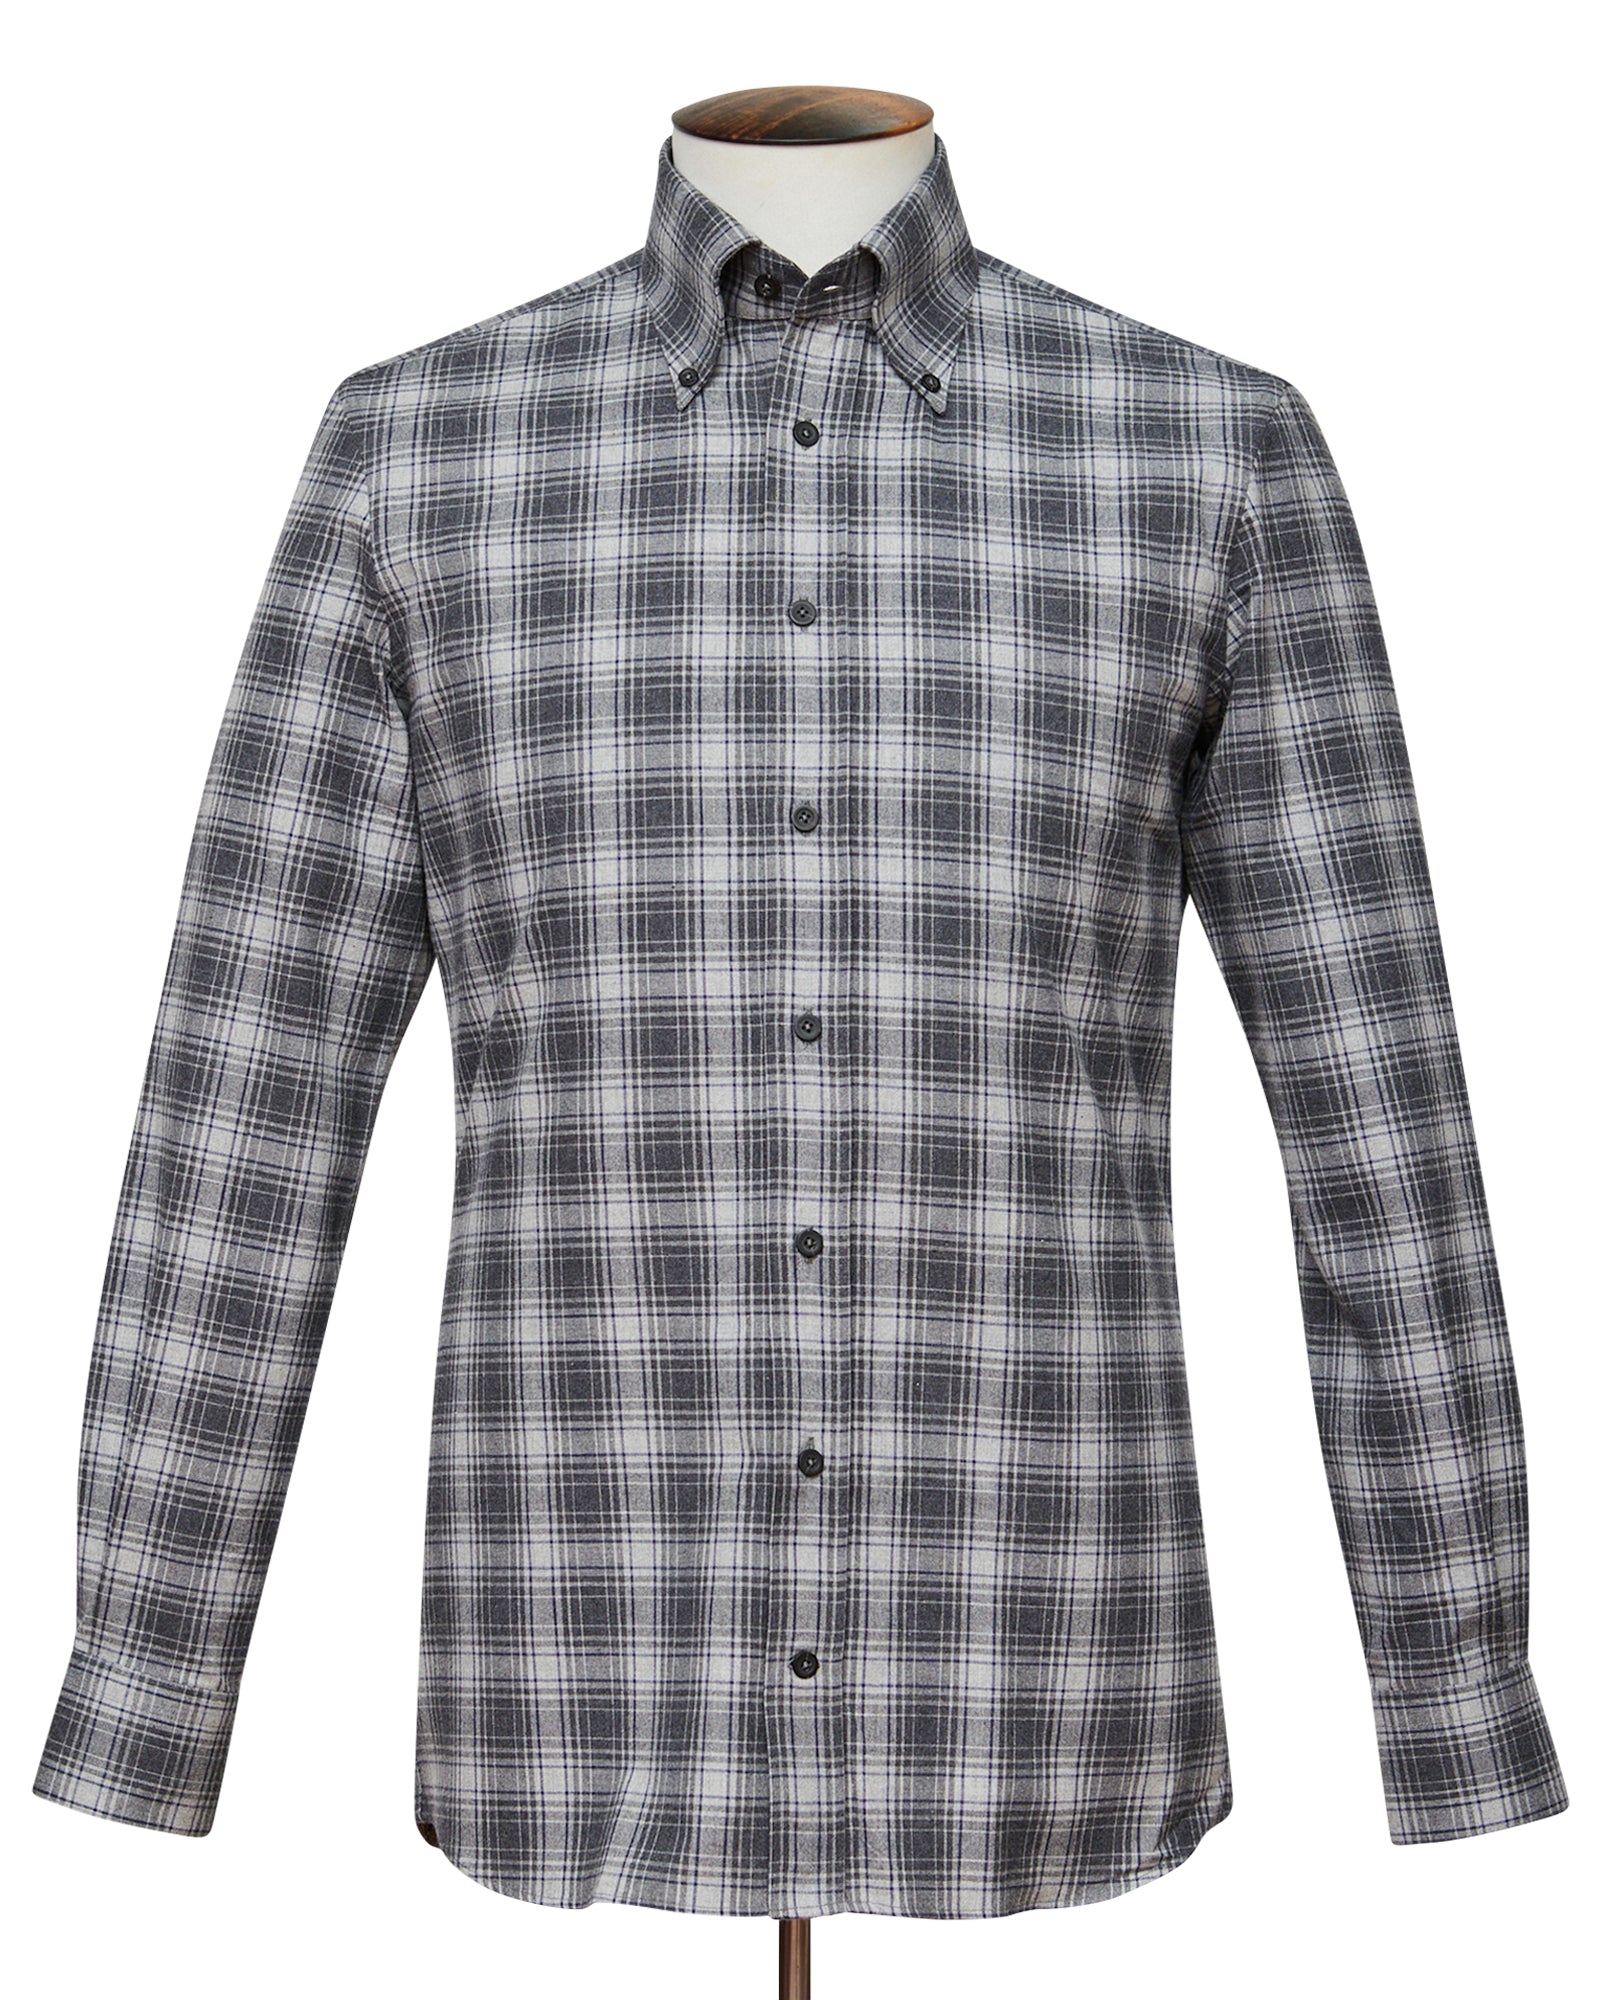 Grey Cotton Flannel with Blue Overcheck Button-Down Shirt